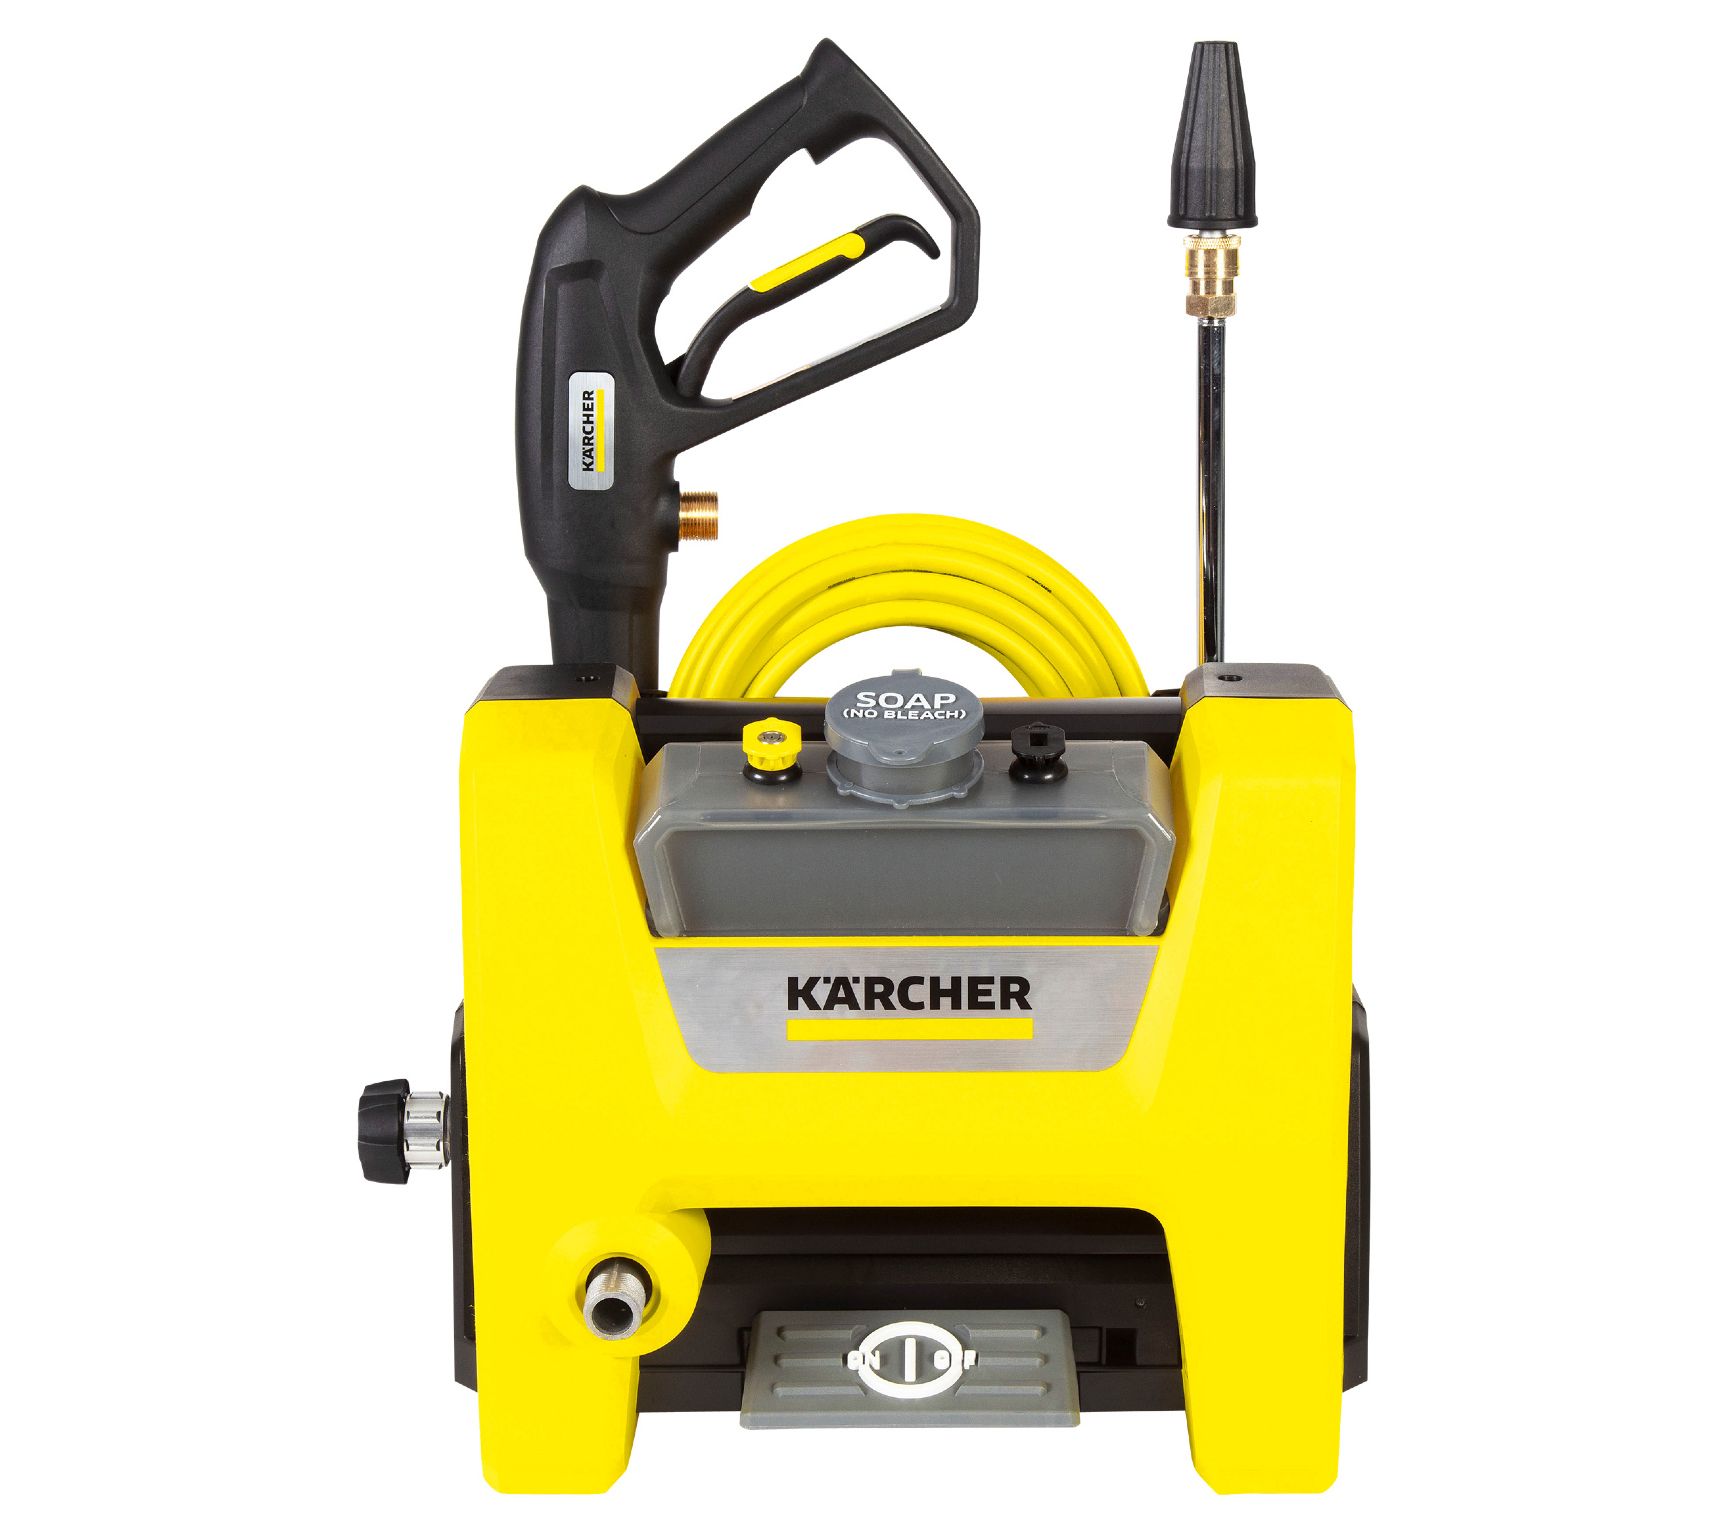 Review of Karcher Electric Pressure Washer, Karcher Cube, K1700 CUBE, Power Washer